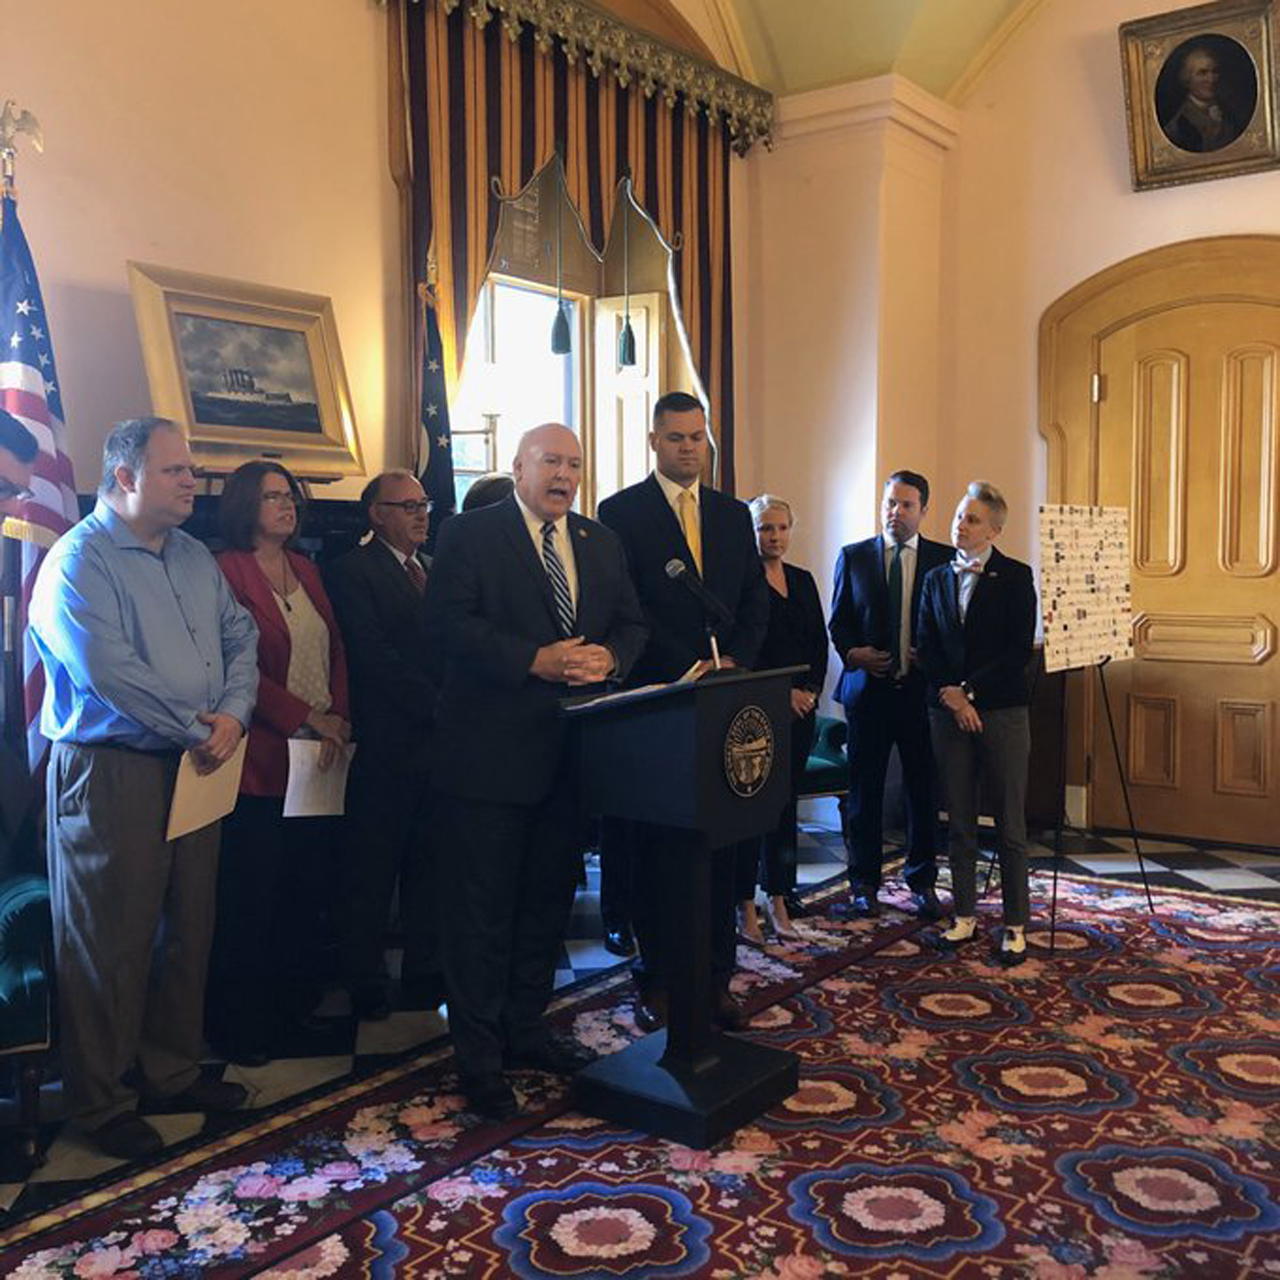 Rep. Skindell speaks at a press conference unveiling the reintroduced Ohio Fairness Act alongside joint sponsor Rep. Brett Hillyer (R-Uhrichsville)